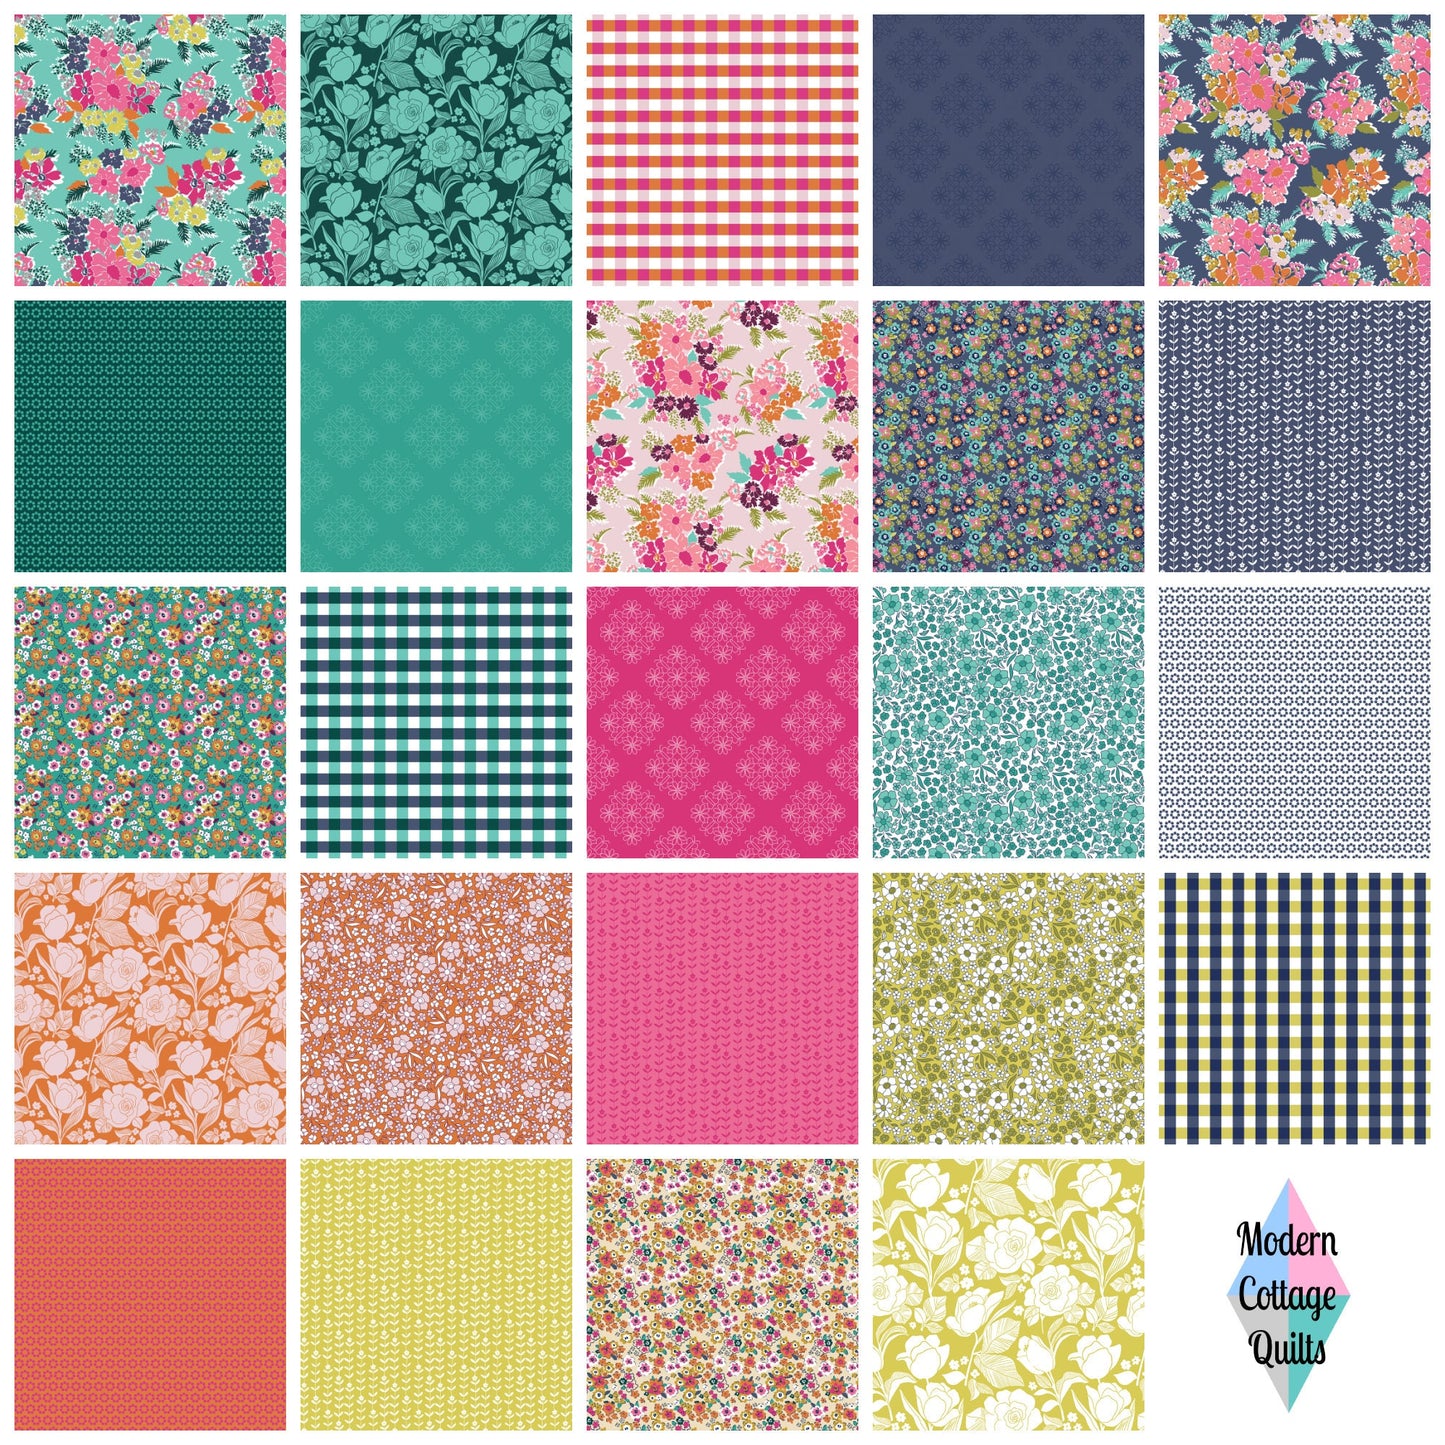 Flower Farm - Outlined Floral Teal Print - by Keera Job for Riley Blake Designs